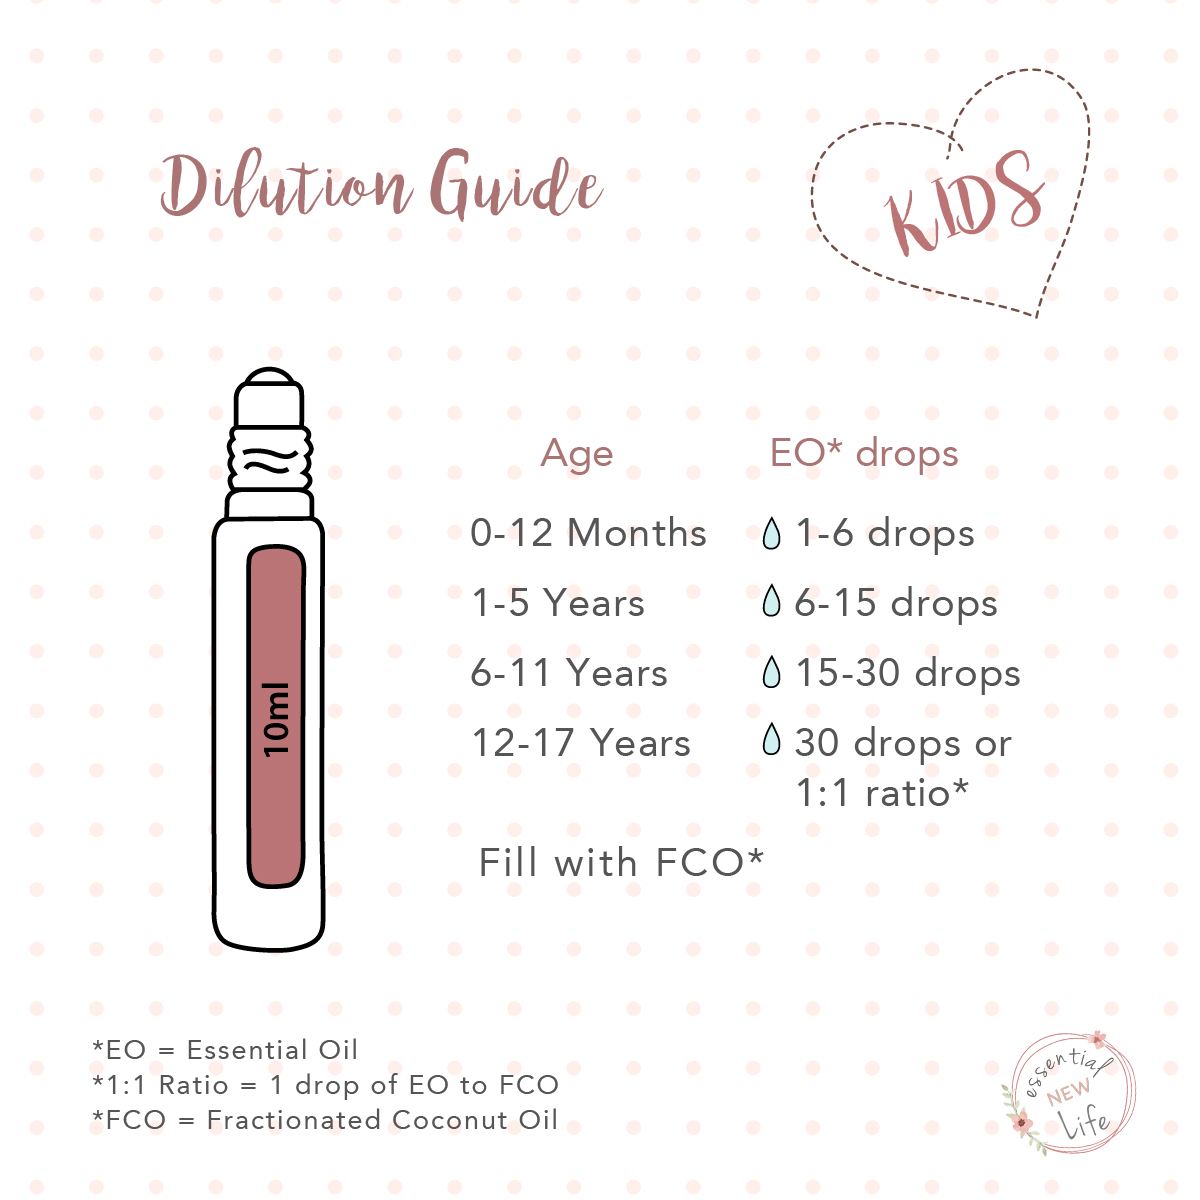 Essential New Life | doTERRA Oils - Kids Dilution Guide